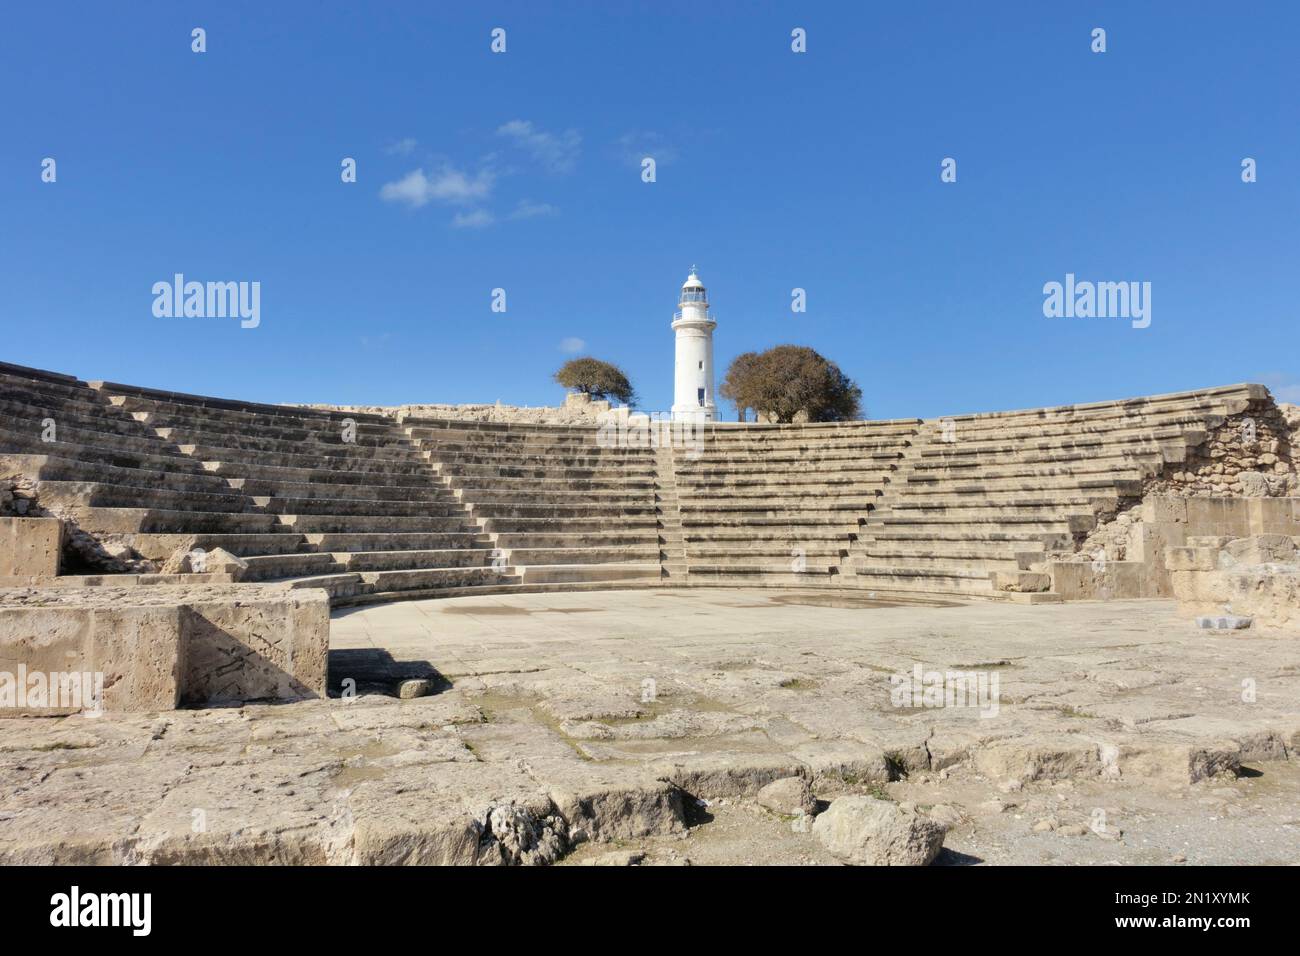 Odeon Amphitheatre And The Lighthouse. Paphos, Cyprus. This is an UNESCO World Heritage site Stock Photo